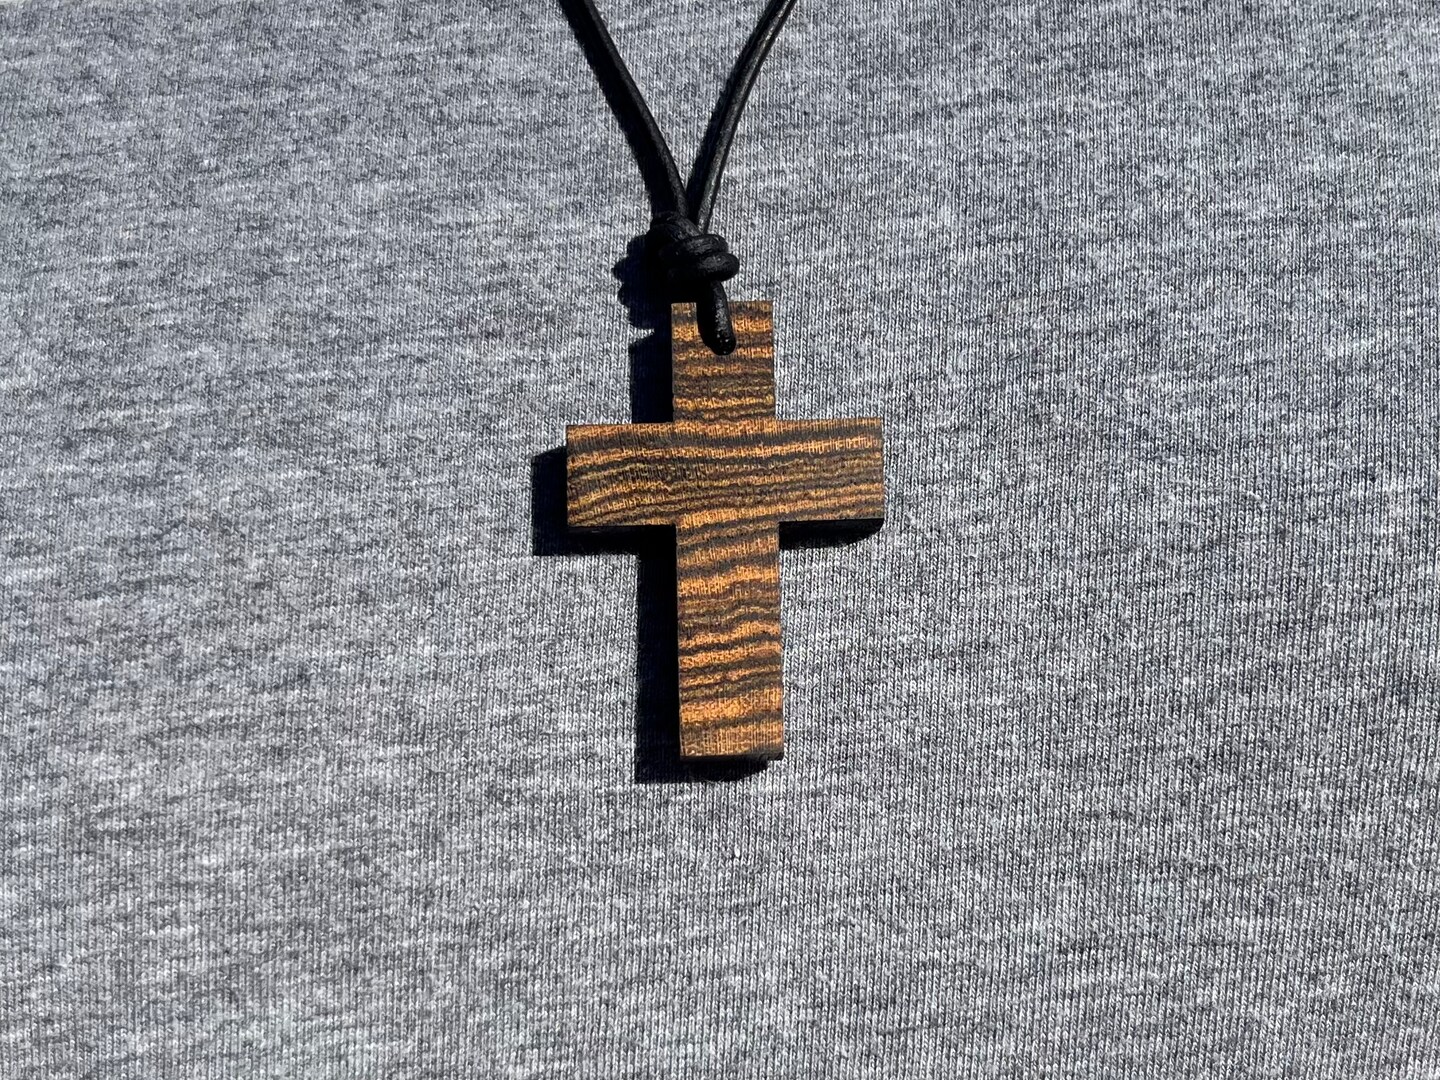 Amazon.com: Natural Ebony Wooden Cross Pendant Necklaces for Boy Girl Women  Men Handcrafted Gift Wood Hang from Rearview Mirror Pendant Decoration :  Automotive